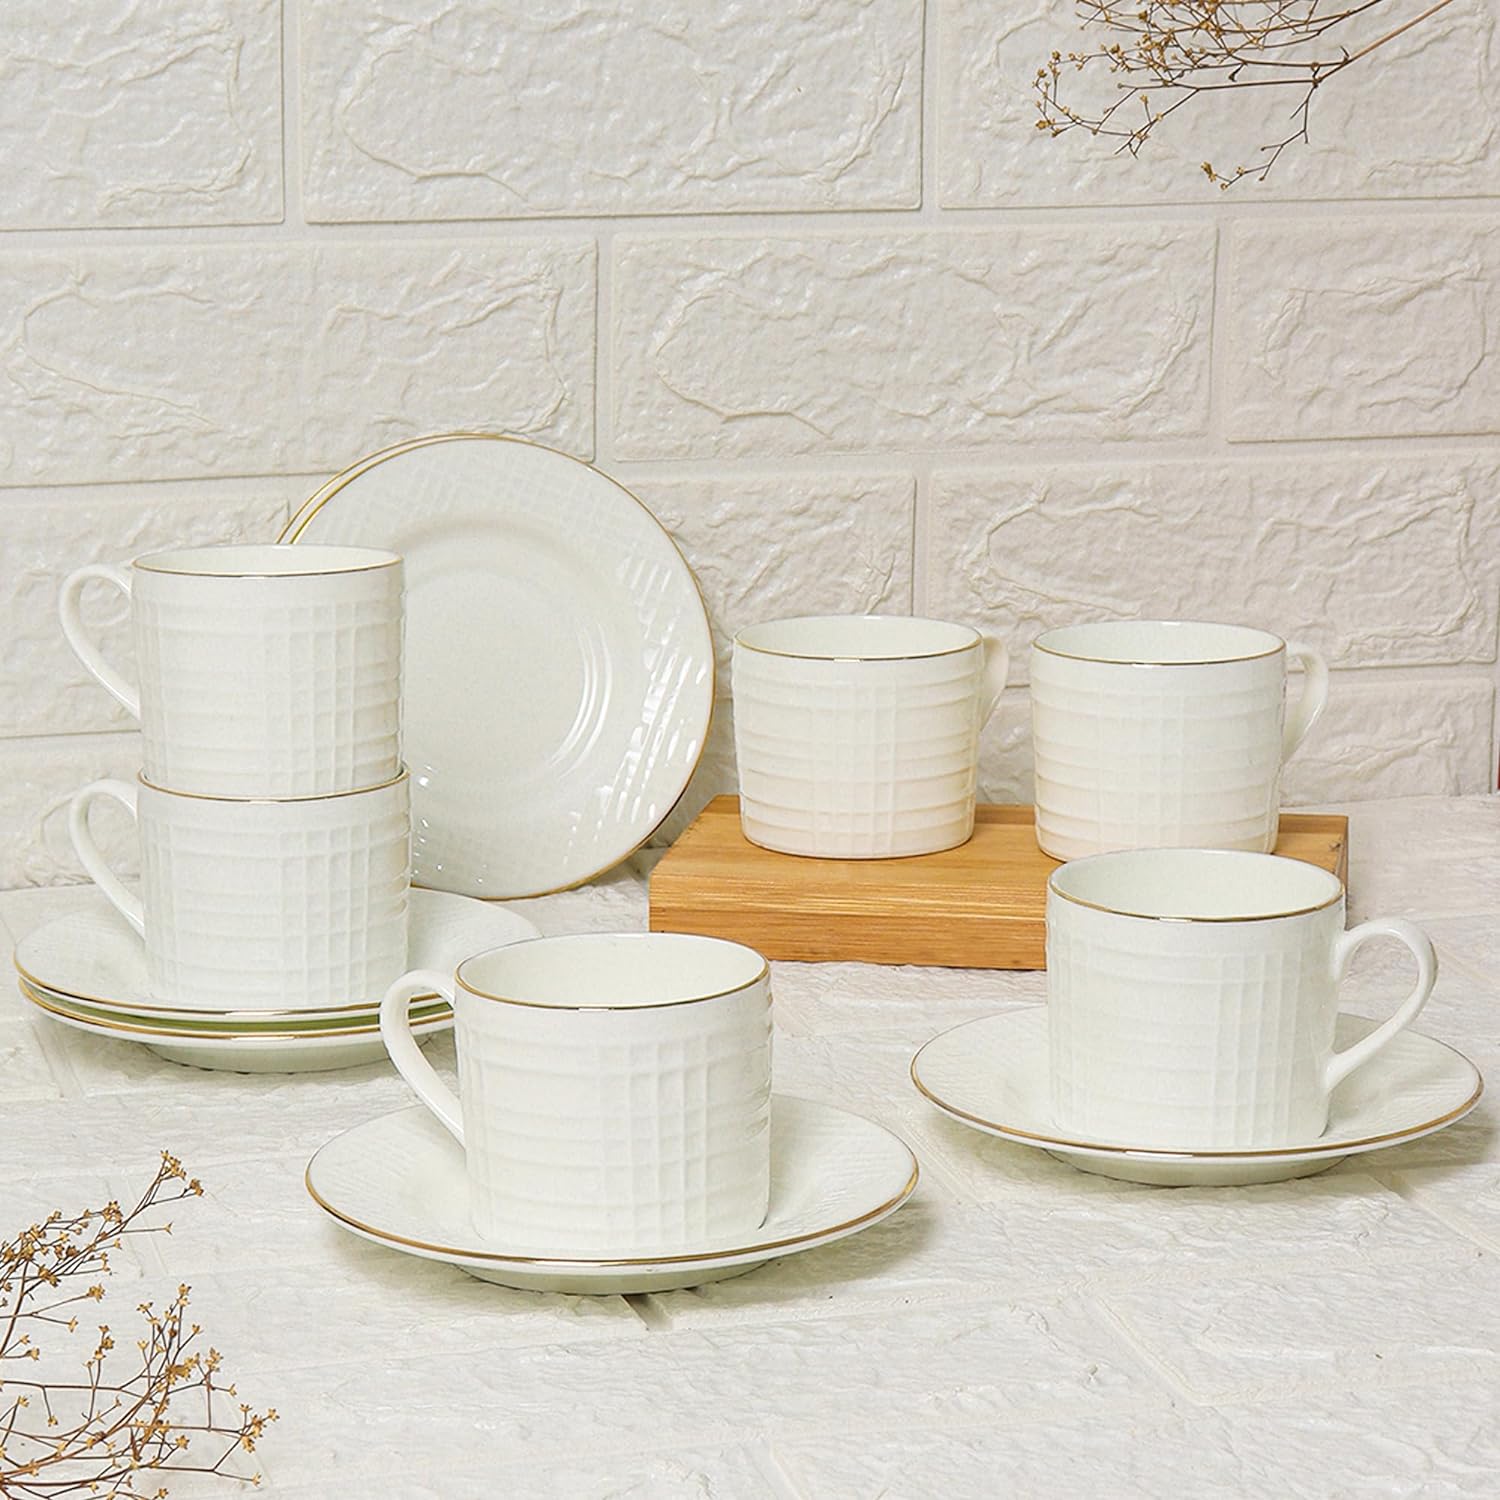 Indian Ceramic Gold Line Square Cut White Tea Cups, Mugs and Saucer-200 ml - Set of 6 (6 Cups, 6 Saucer)